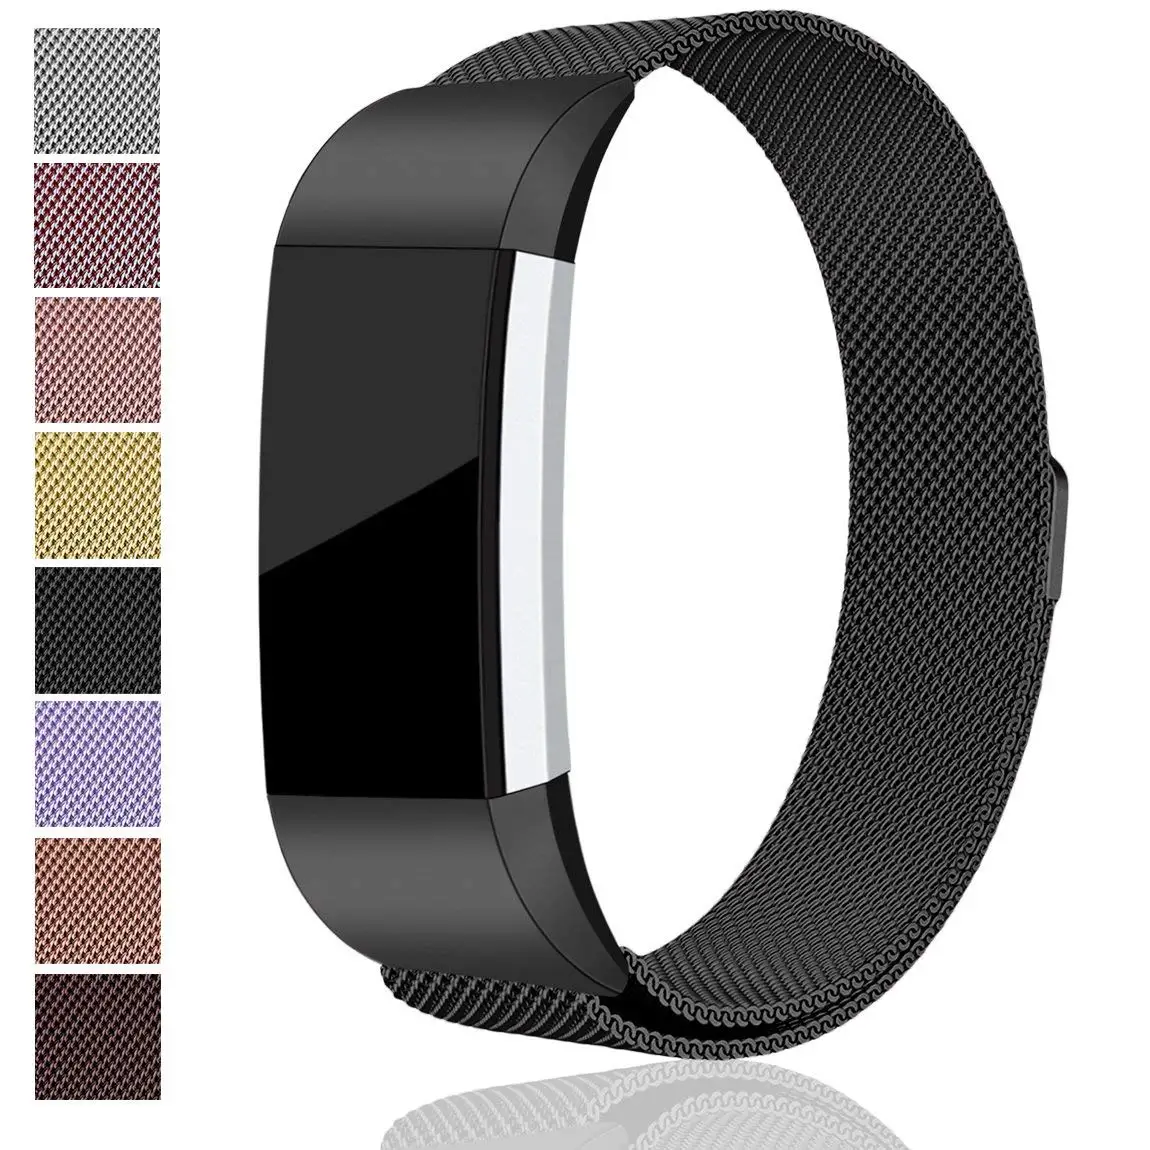 

For Fitbit Charge 2 Bands Stainless Steel Milanese Loop Metal Replacement Accessories Bracelet Strap with Unique Magnet Lock